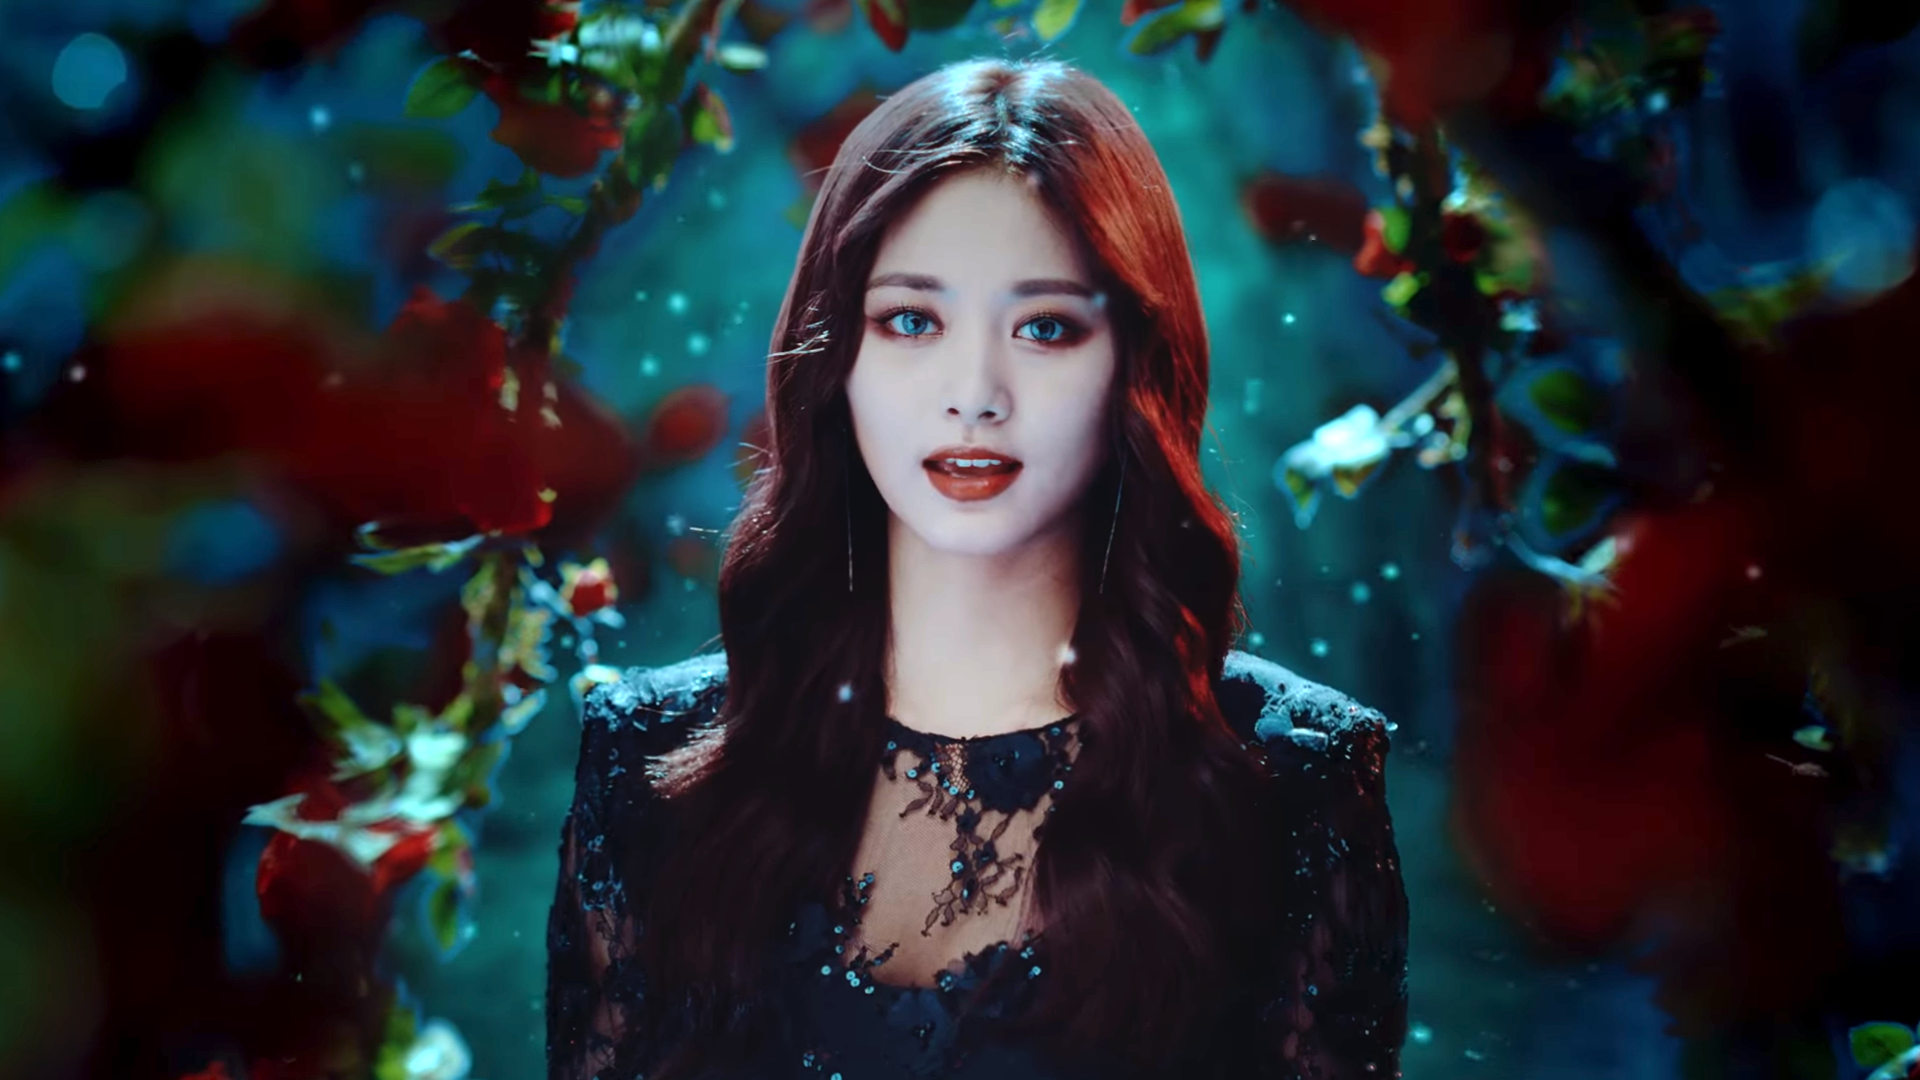 Tzuyu From Mv Brightened Up For Wallpaper 1080p Twice